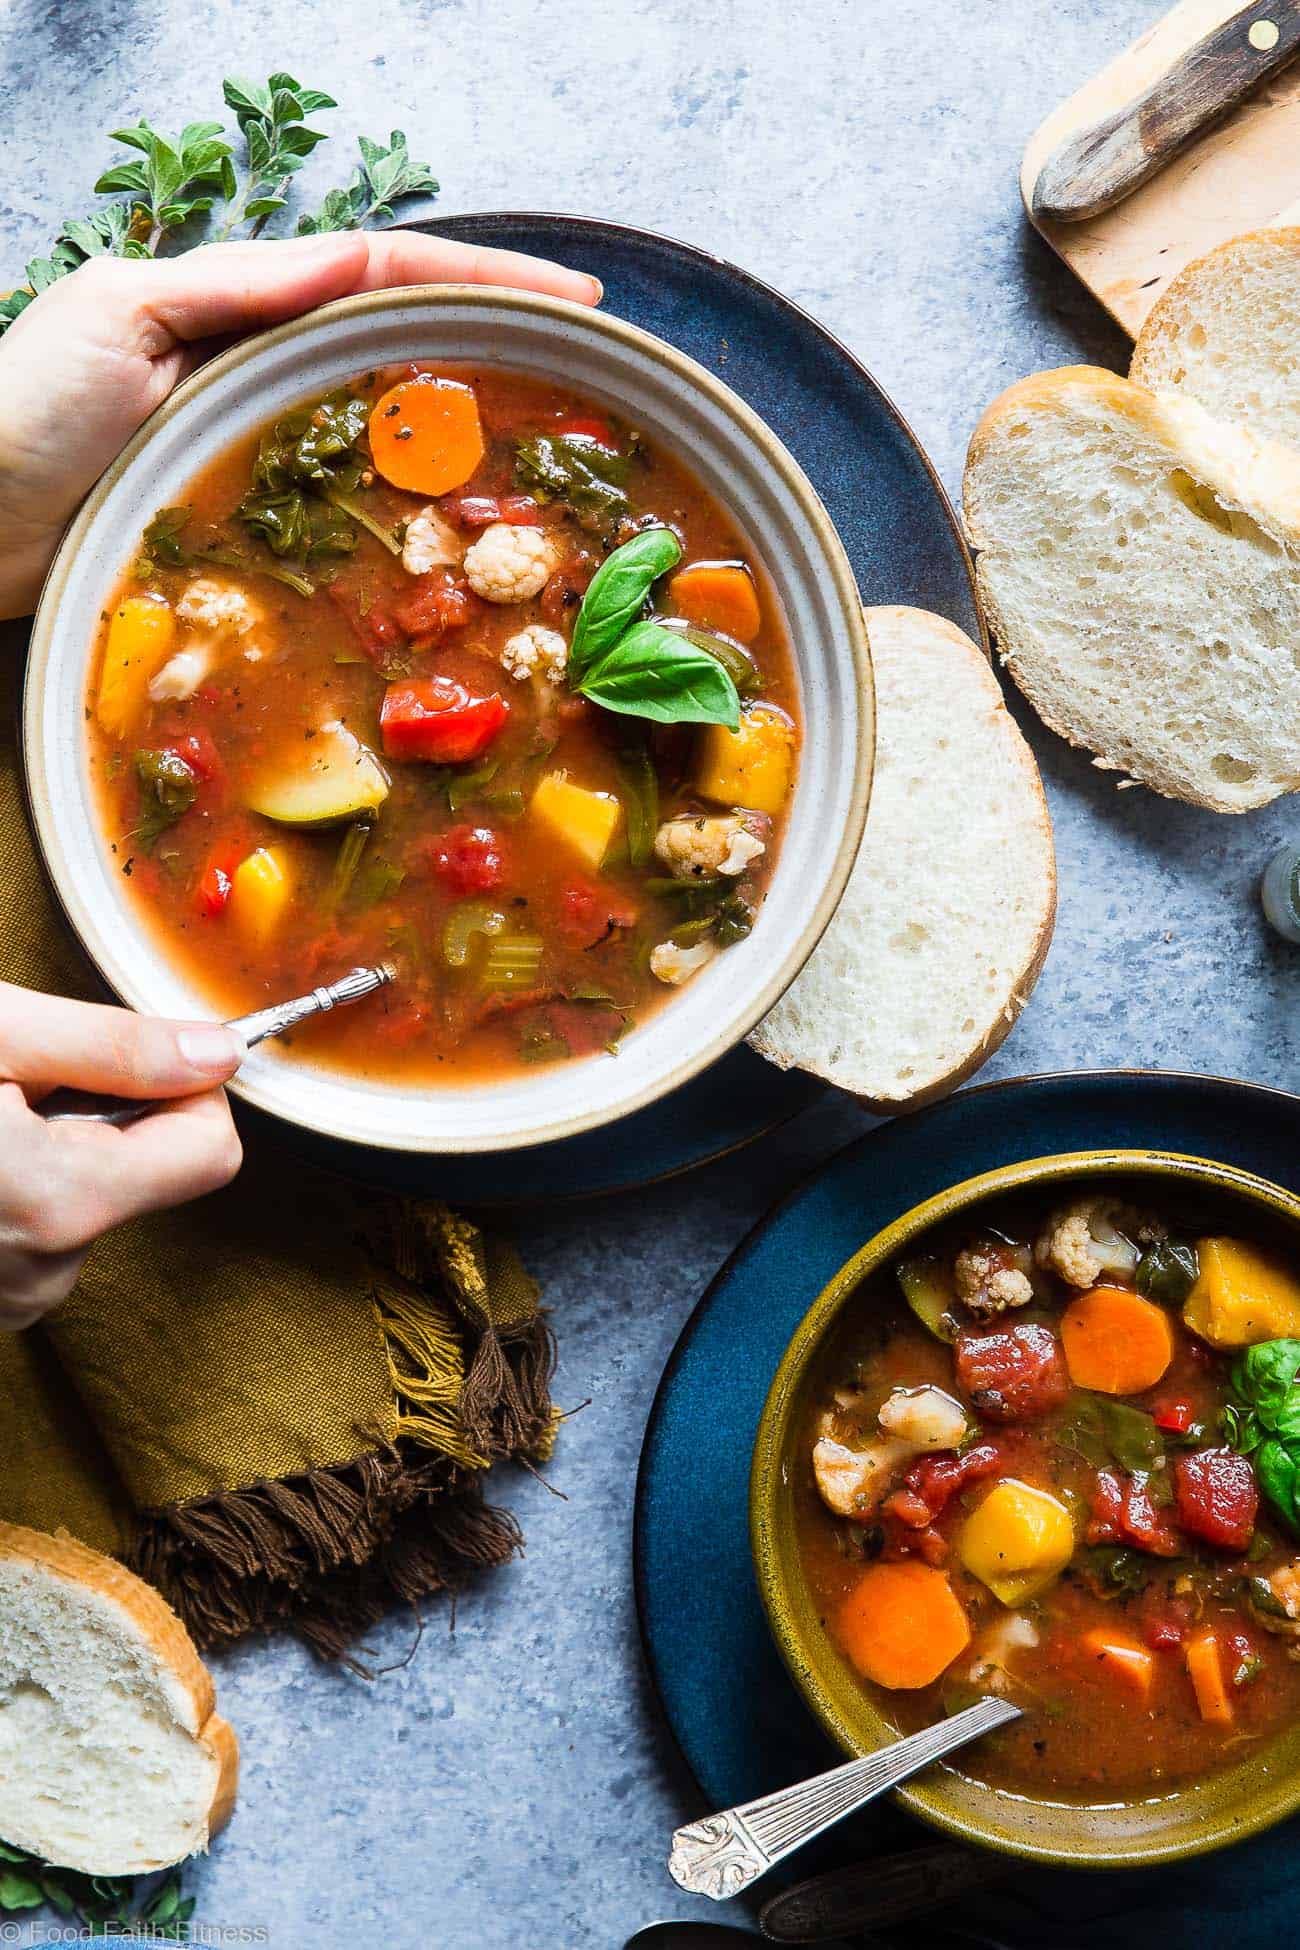 Easy Homemade Crockpot Vegetable Soup Recipe - Let the crockpot do the work for you with this simple soup that is a whole30, paleo and vegan dinner with only 1 SmartPoint and 85 calories! A family friendly dinner for busy weeknights that will please the pickiest of eaters! | Foodfaithfitness.com | @FoodFaithFit